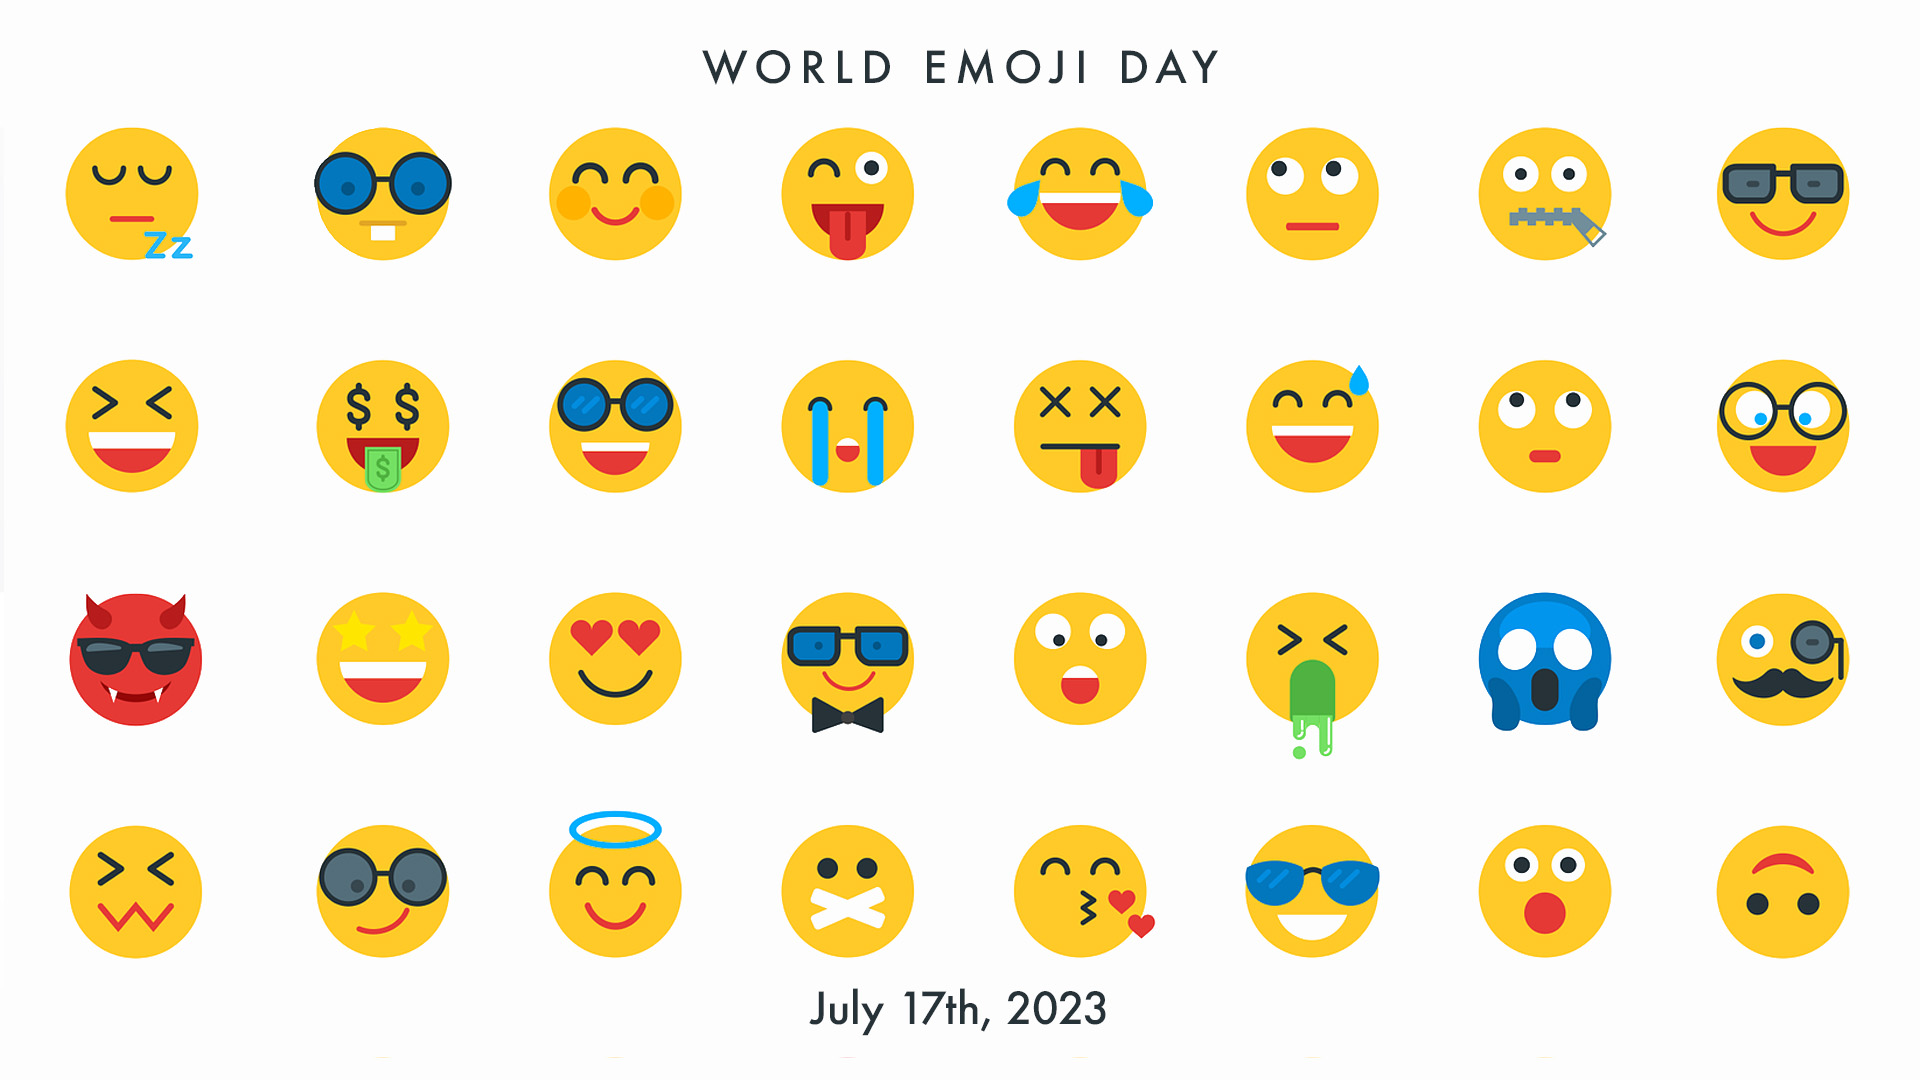 White background with 8 columns across and 4 rows down of different emoji faces. Written across the top of the image is World Emoji Day and written across the bottom says July 17th, 2023